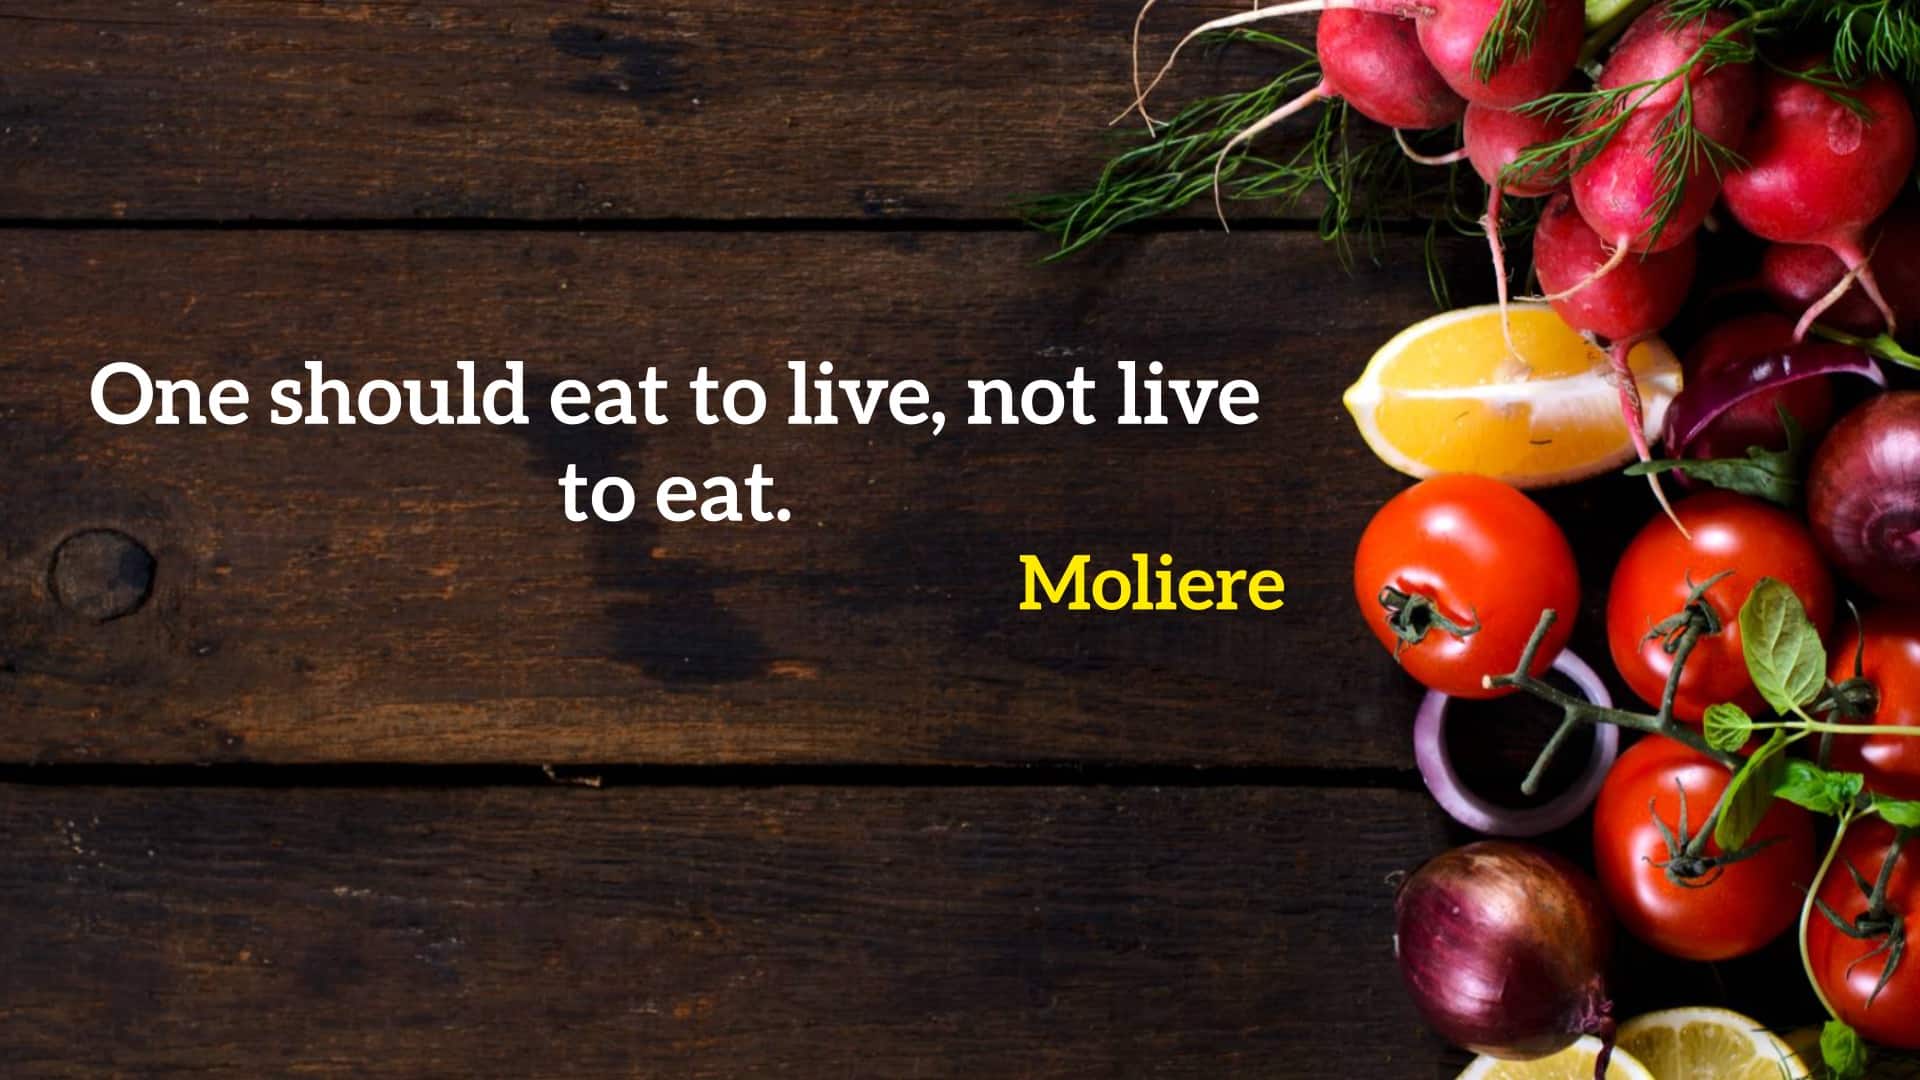 One should eat to live, not live to eat.